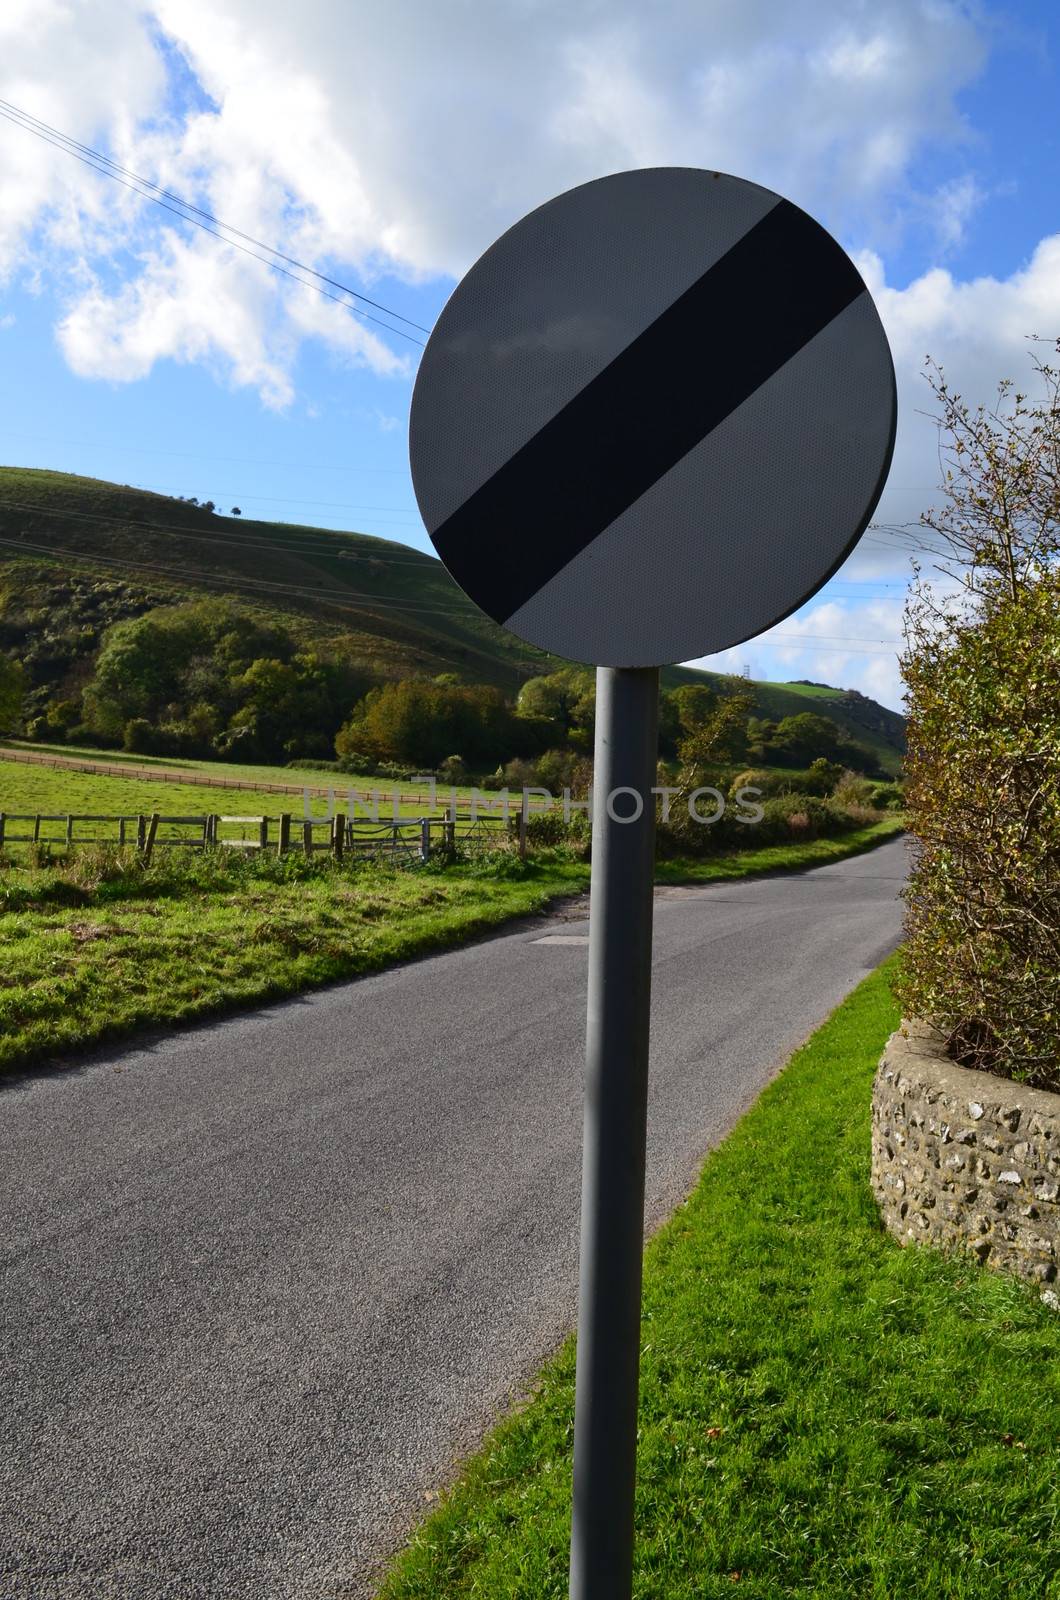 British national speed limit traffic road sign on a rural road in Southern England.